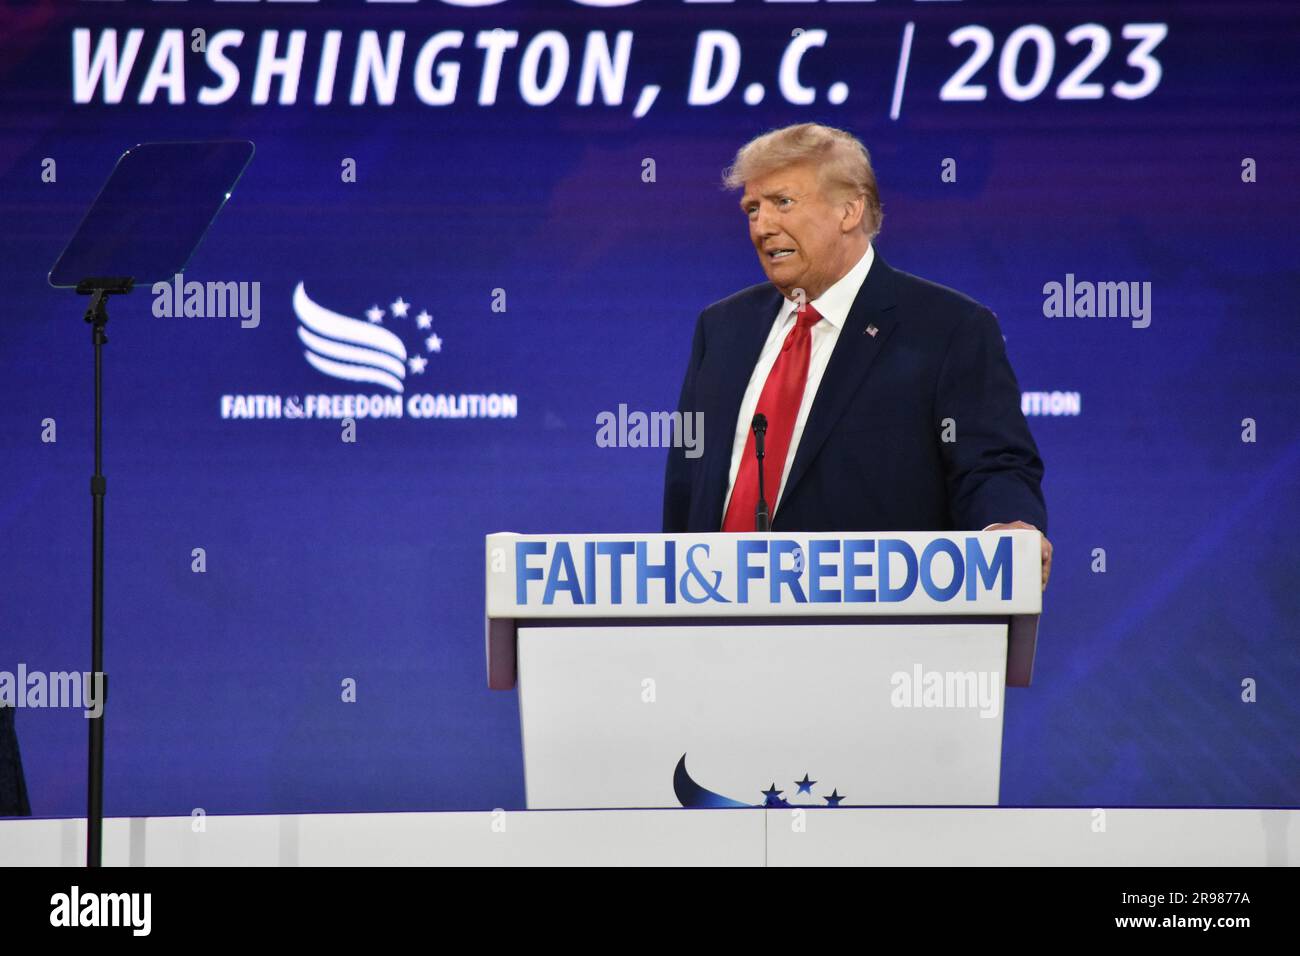 Washington, United States. 24th June, 2023. Former President of the United States Donald J. Trump reacts to Chris Christie being booed at the conference when he spoke against the former president on Friday morning, June 23, 2023. Former U.S. President Donald J. Trump claimed his innocence and said the classified documents investigation was a hoax. (Photo by Kyle Mazza/SOPA Images/Sipa USA) Credit: Sipa USA/Alamy Live News Stock Photo